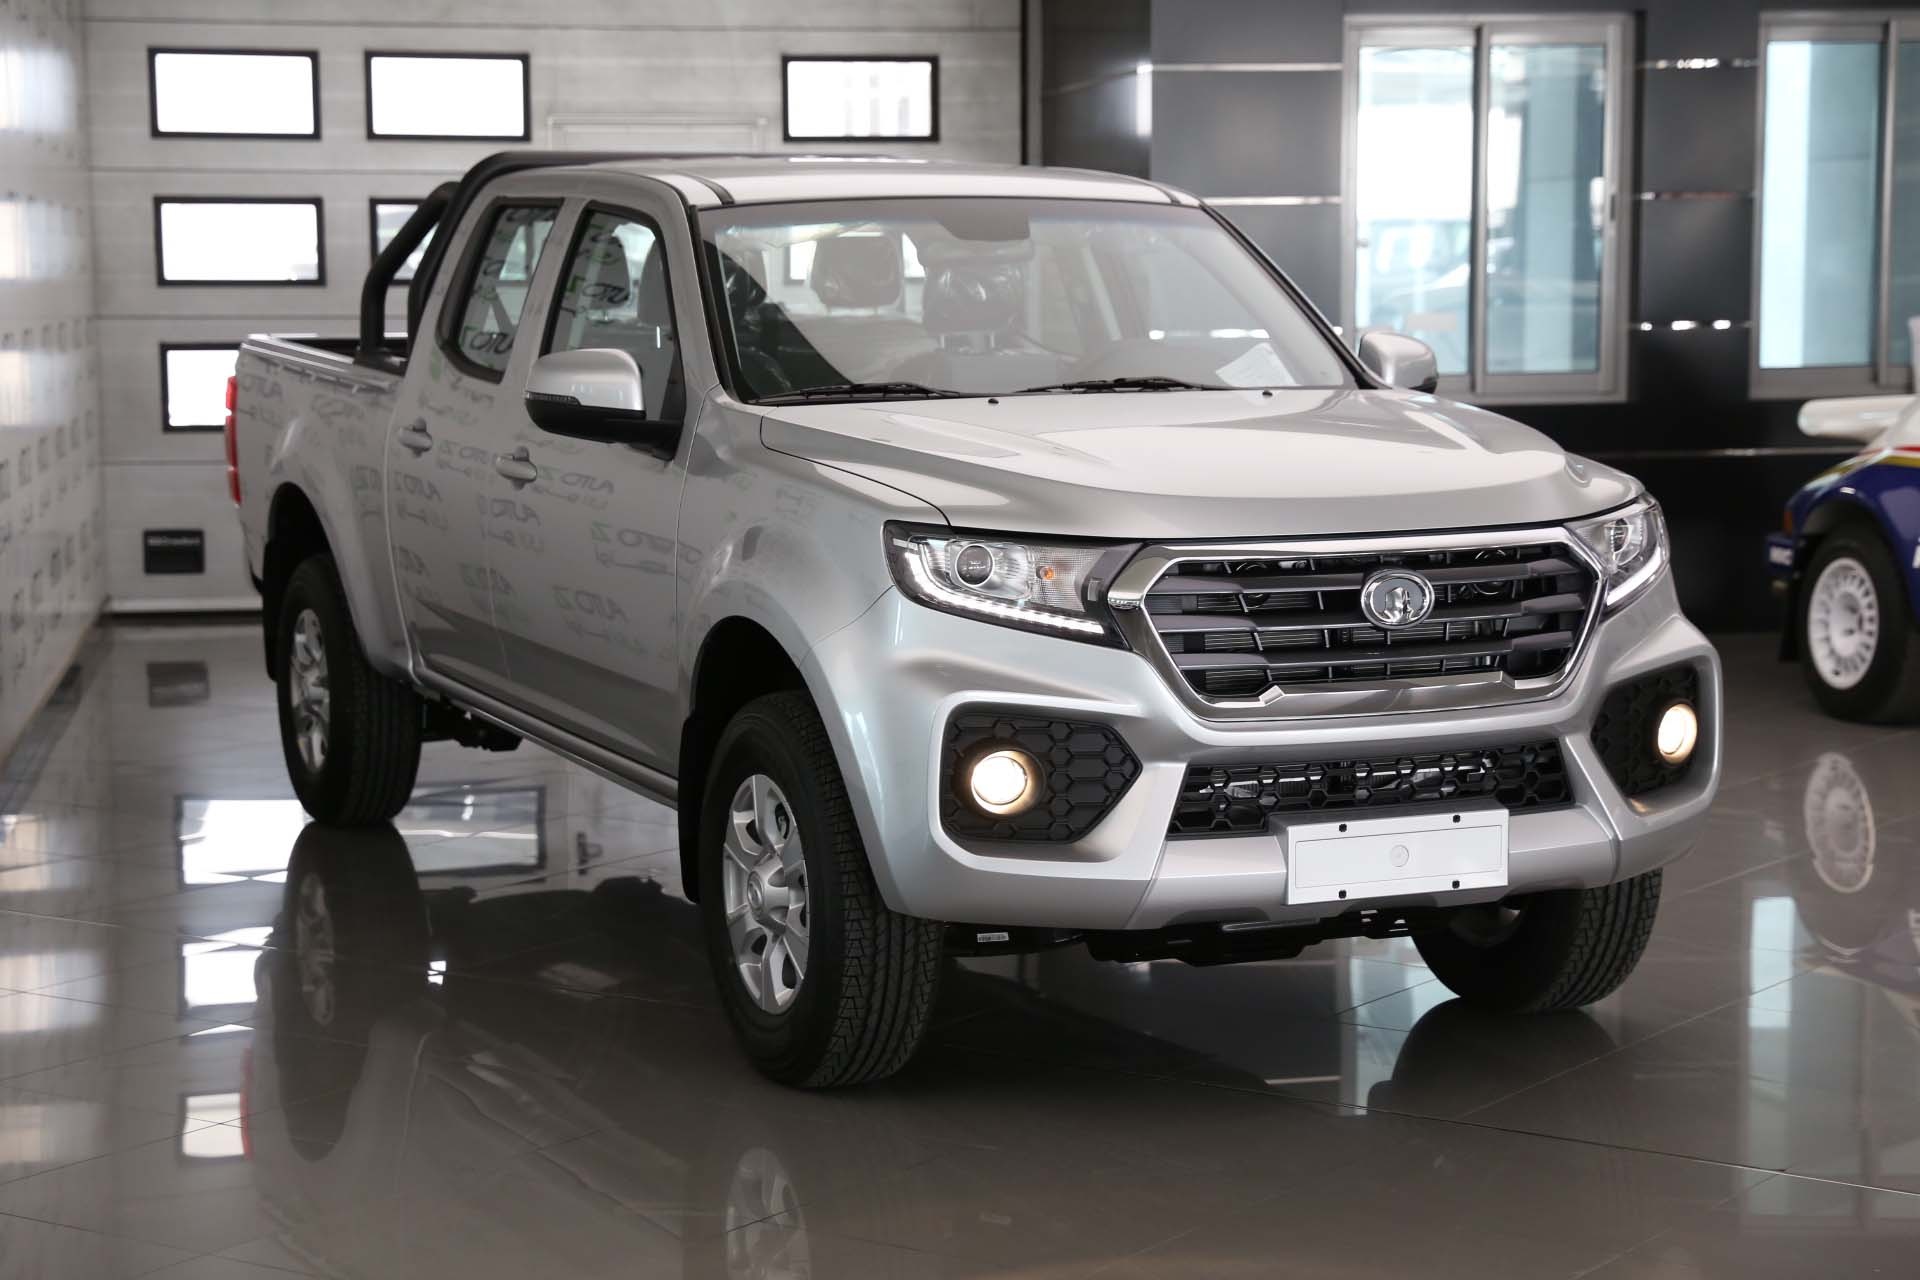 Great Wall Wingle 7 ESP, White petrol 4x4 auto, A luxury off-road experience, Driving perfection in motion, 1920x1280 HD Desktop